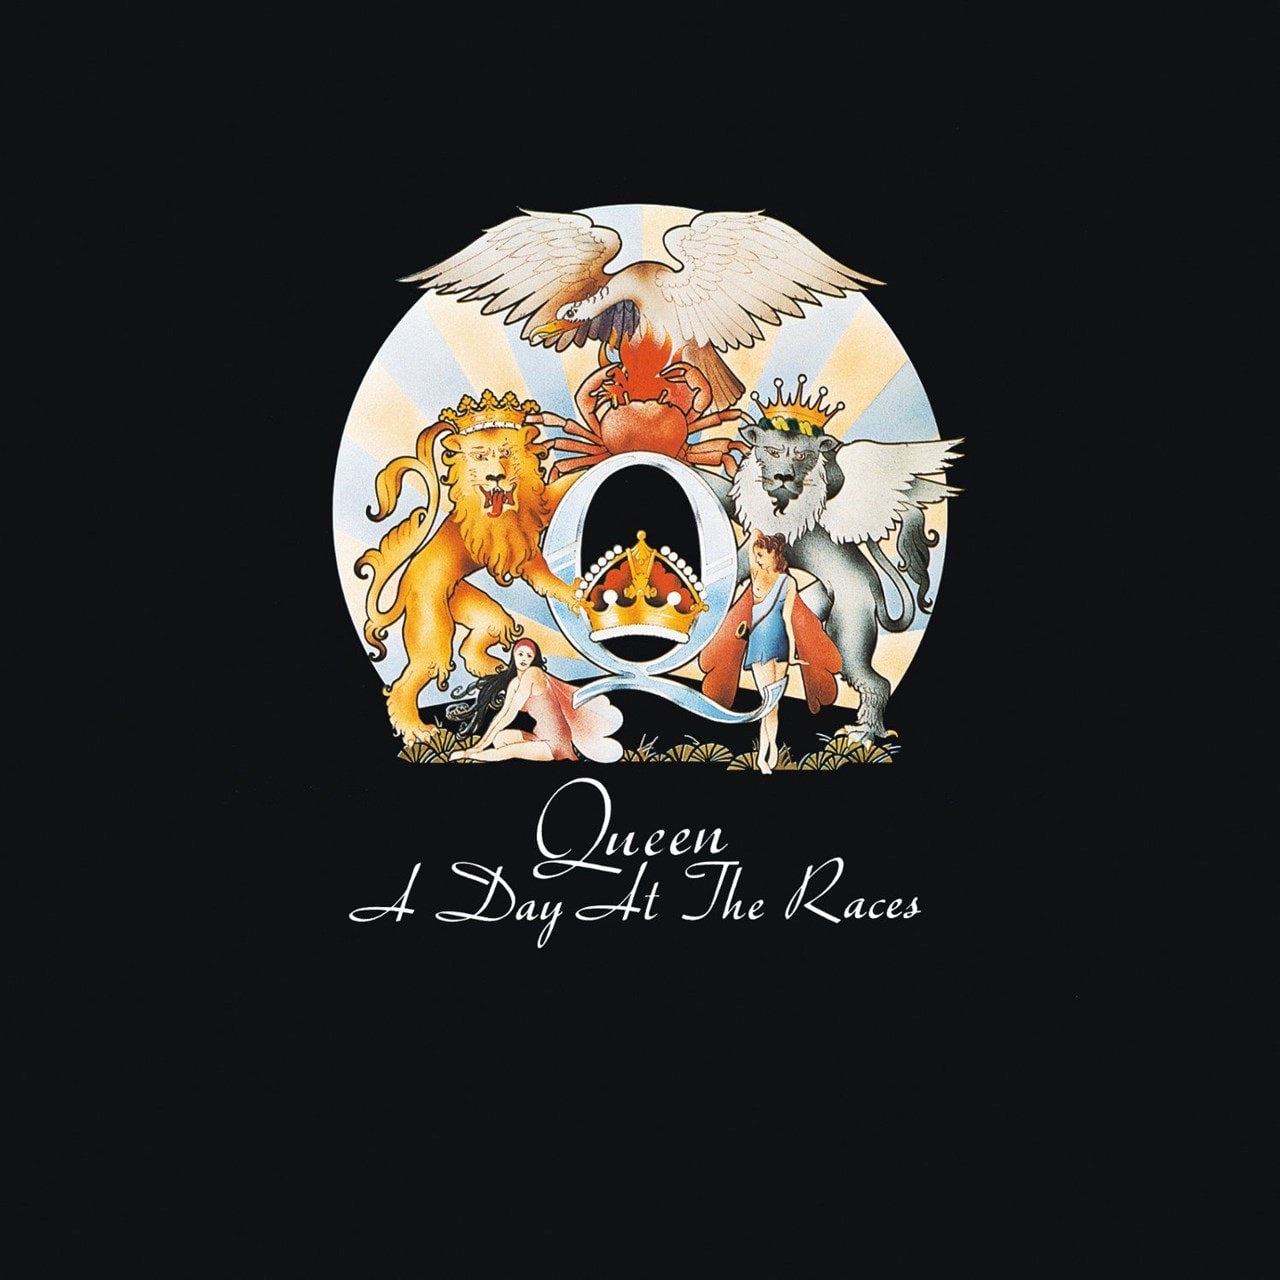 Queen - A Day At The Races (2LP Gatefold Sleeve - Half Speed Mastered)